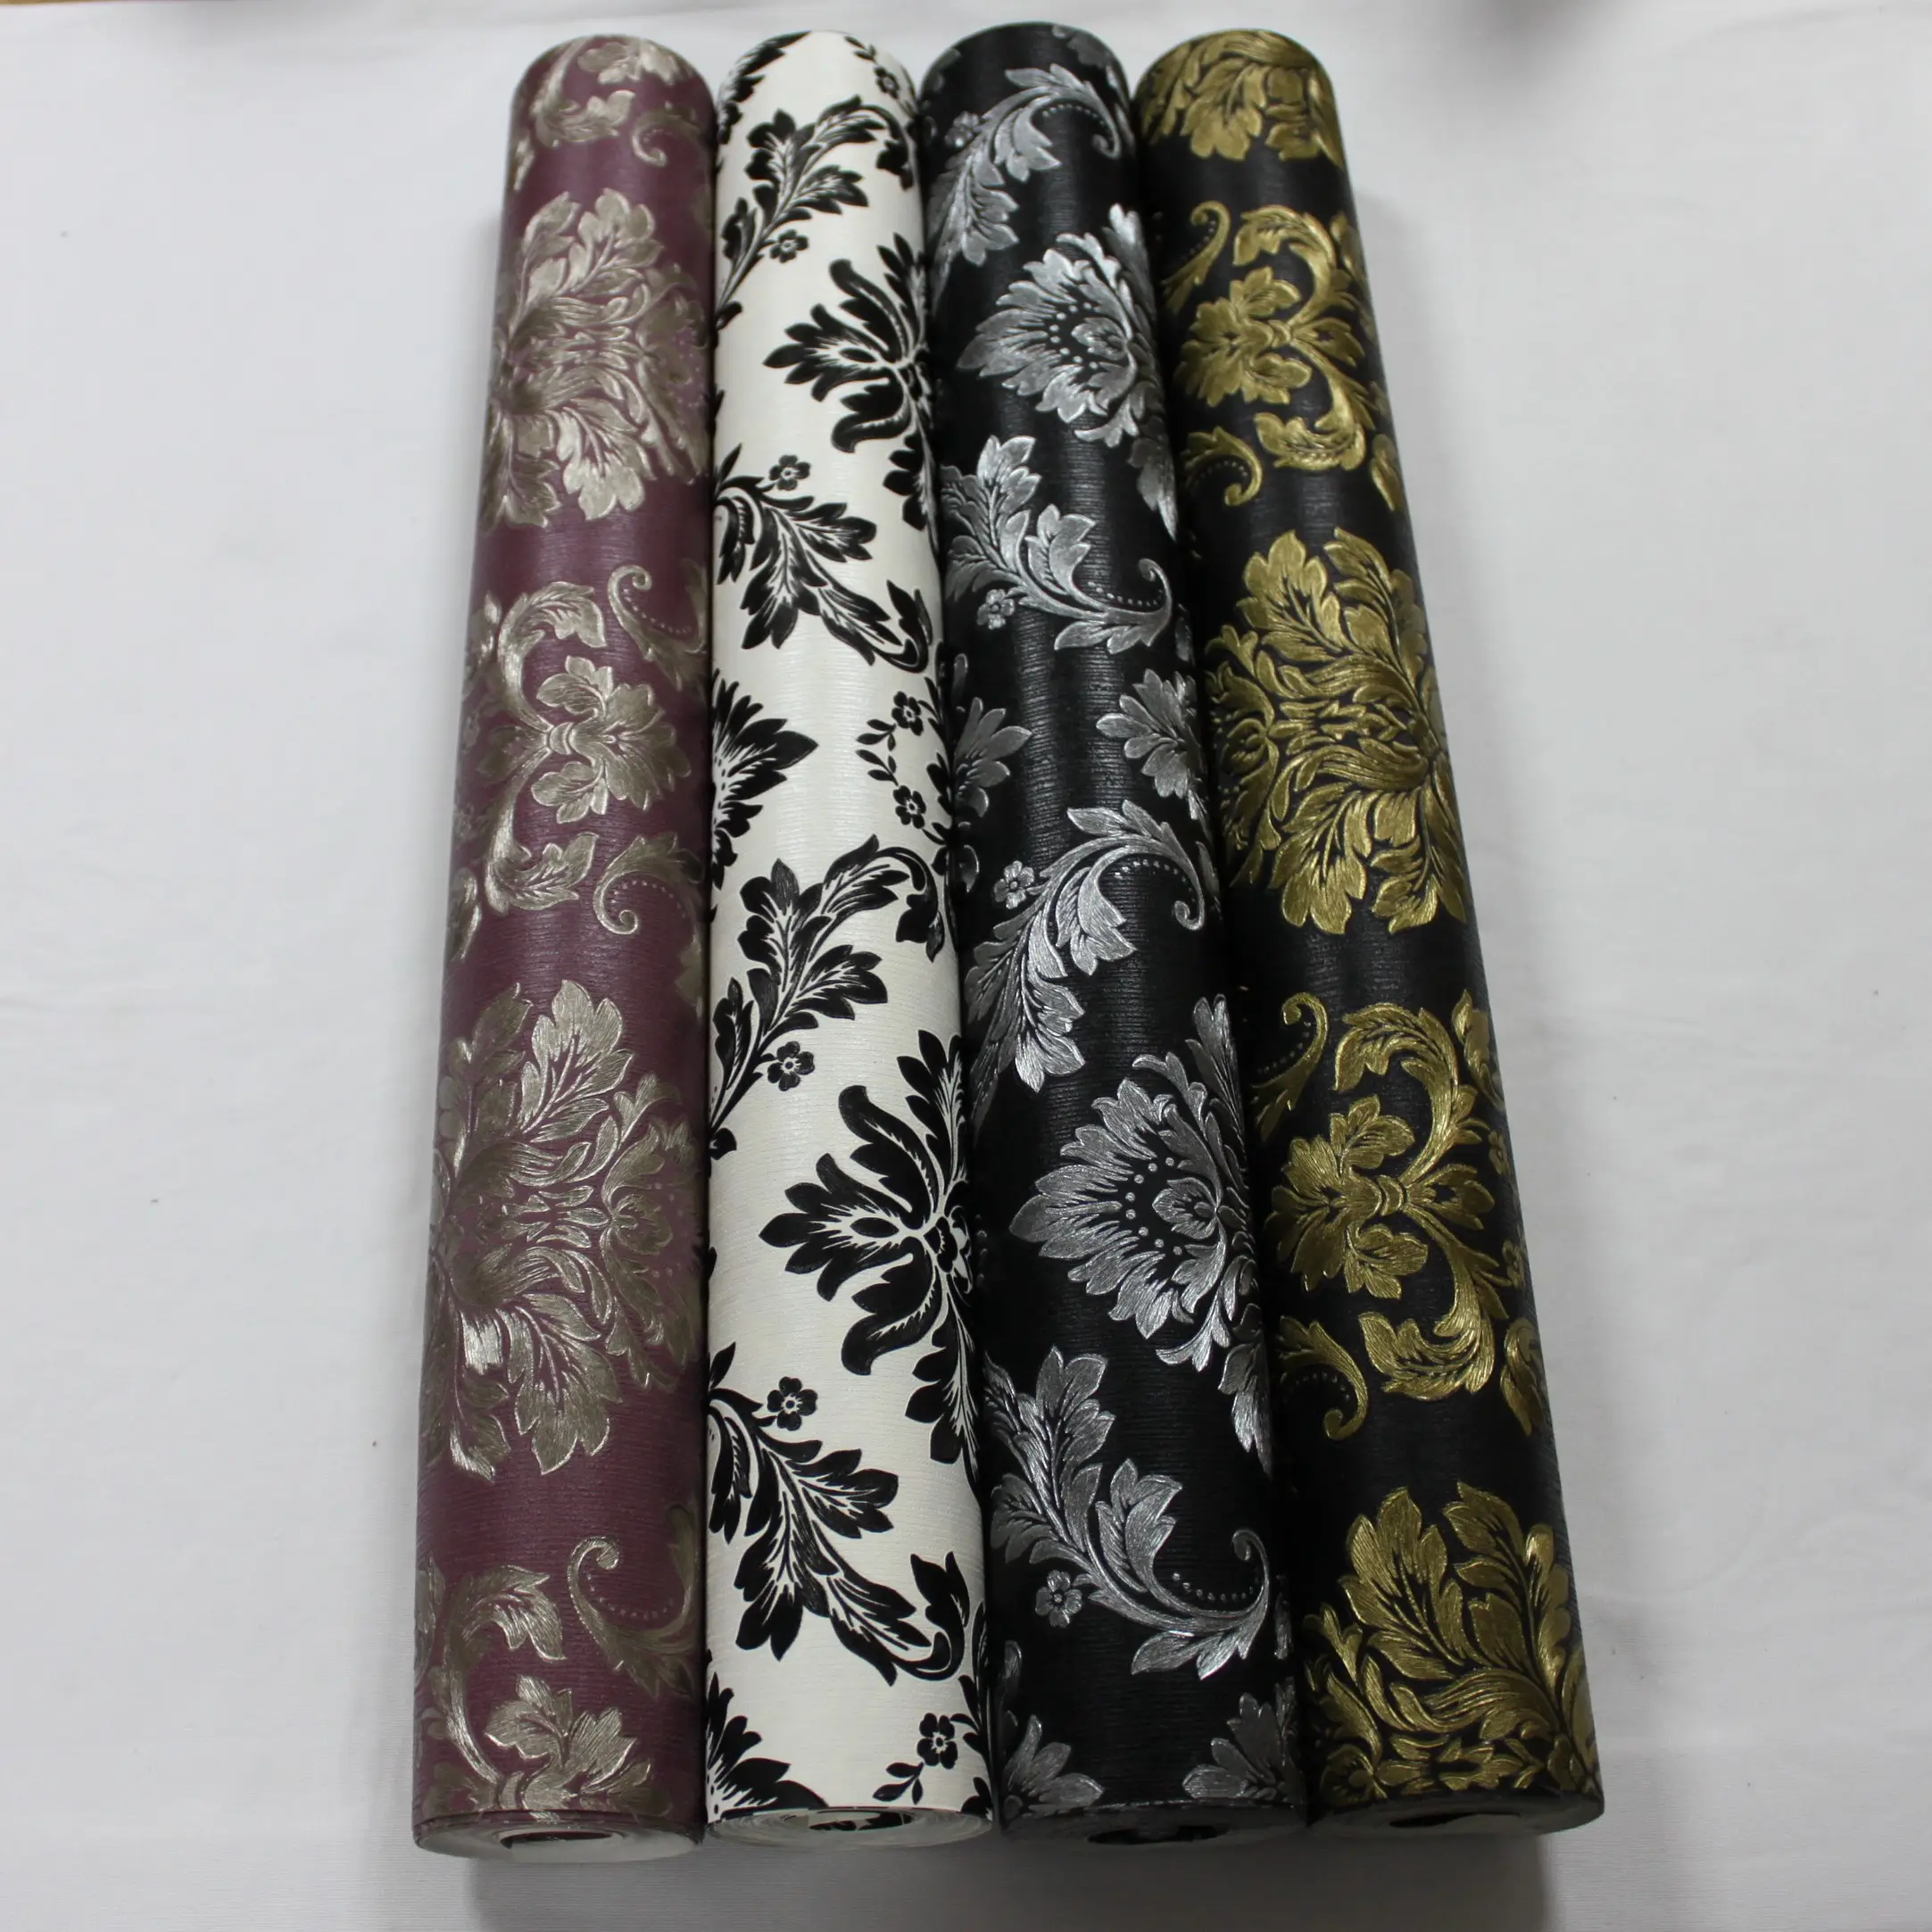 Damask Pattern wall paper rolls PVC Vinyl 3D Wallpaper Home Decor Home Office Workplace Hotel